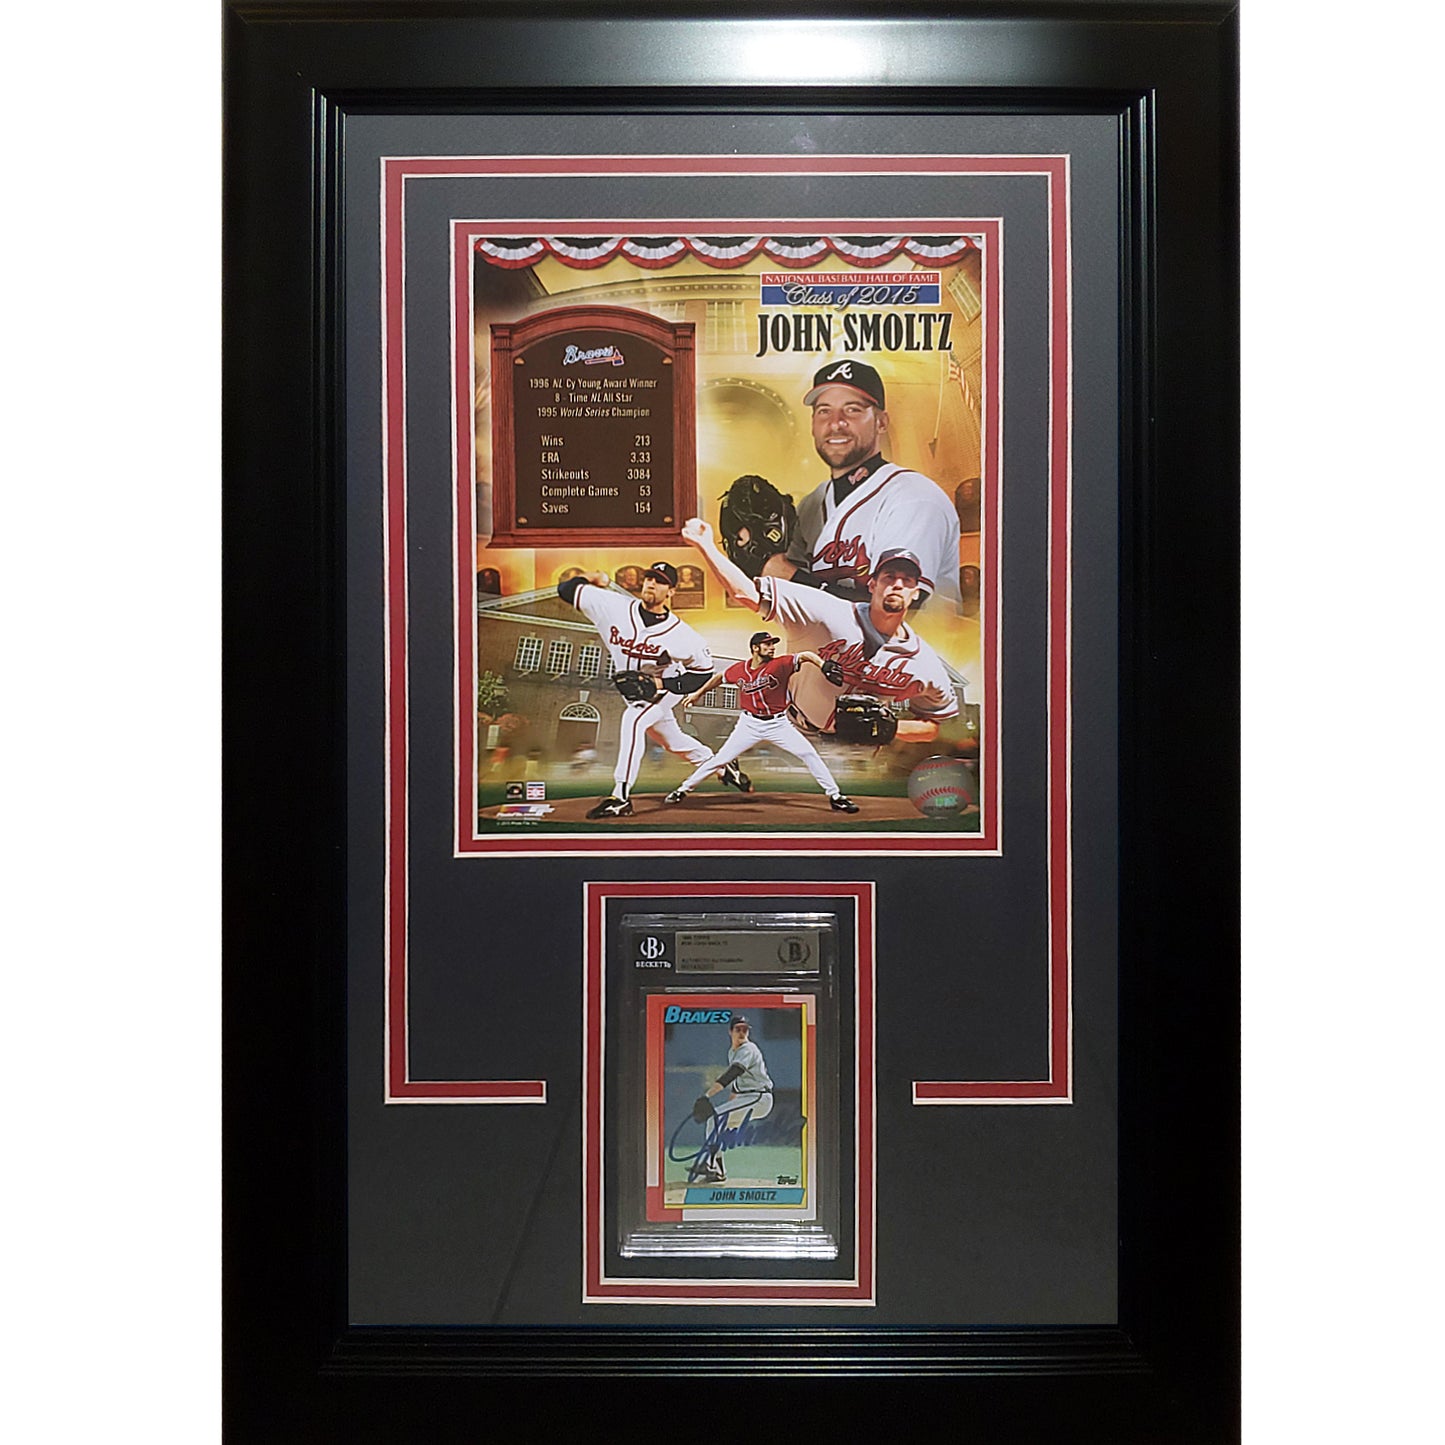 John Smoltz Autographed Baseball Card Deluxe Framed with Atlanta Braves (HOF Collage) 8x10 Photo